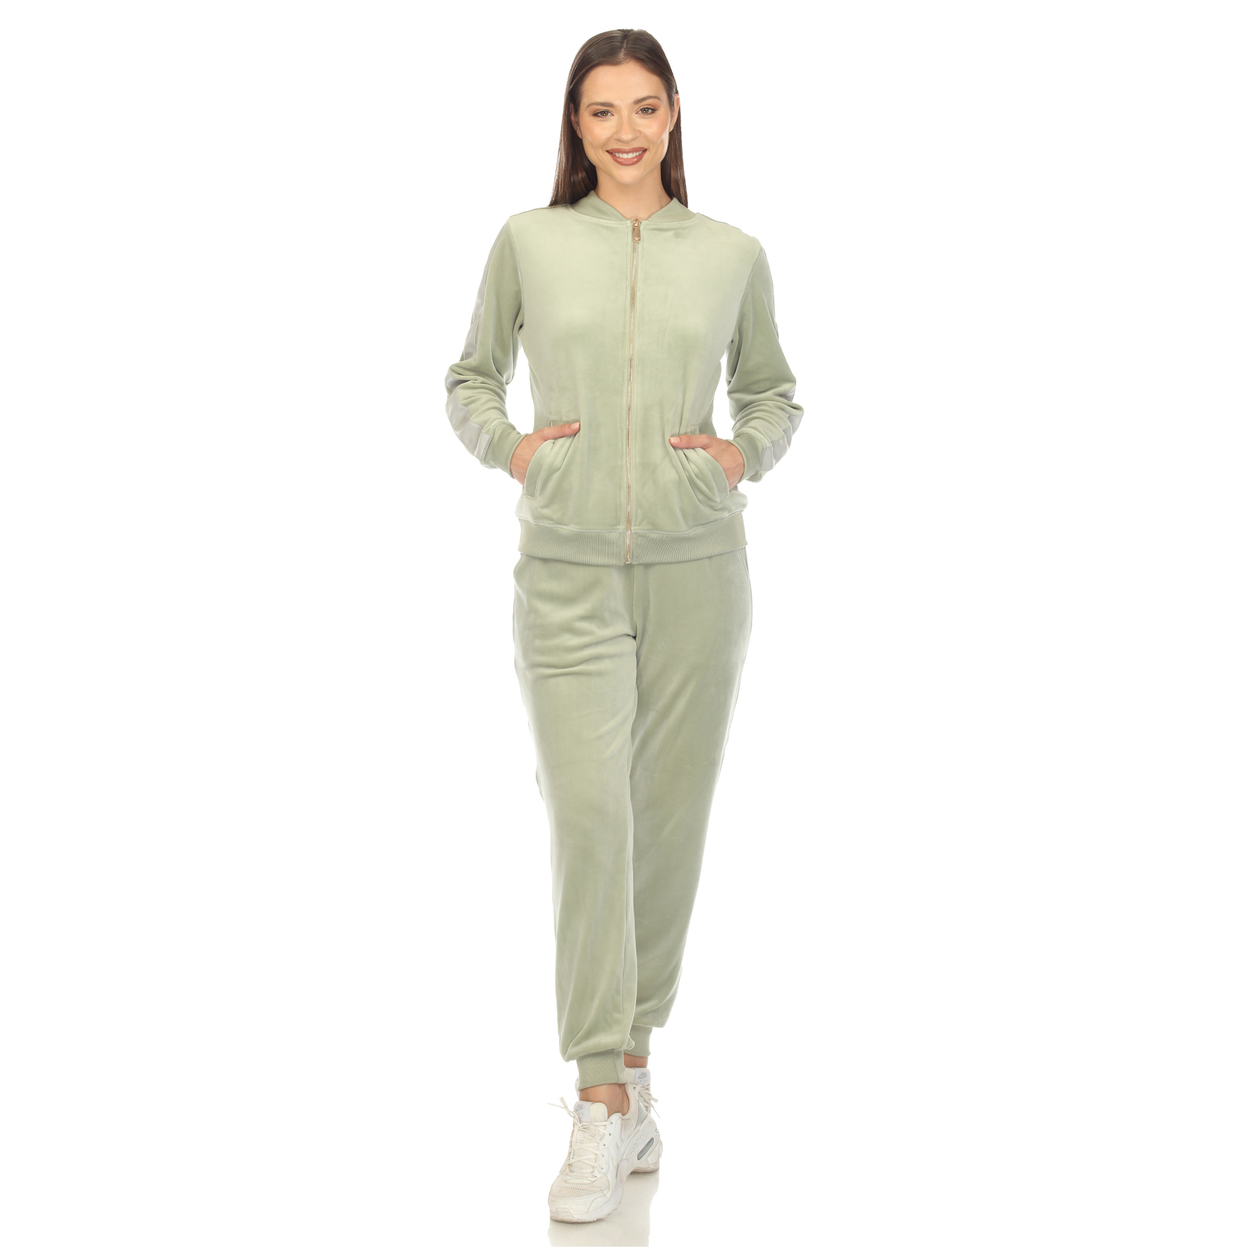 White Mark Women's 2-Piece Velour Tracksuit Set With Faux Leather Stripe - Sage, X-large